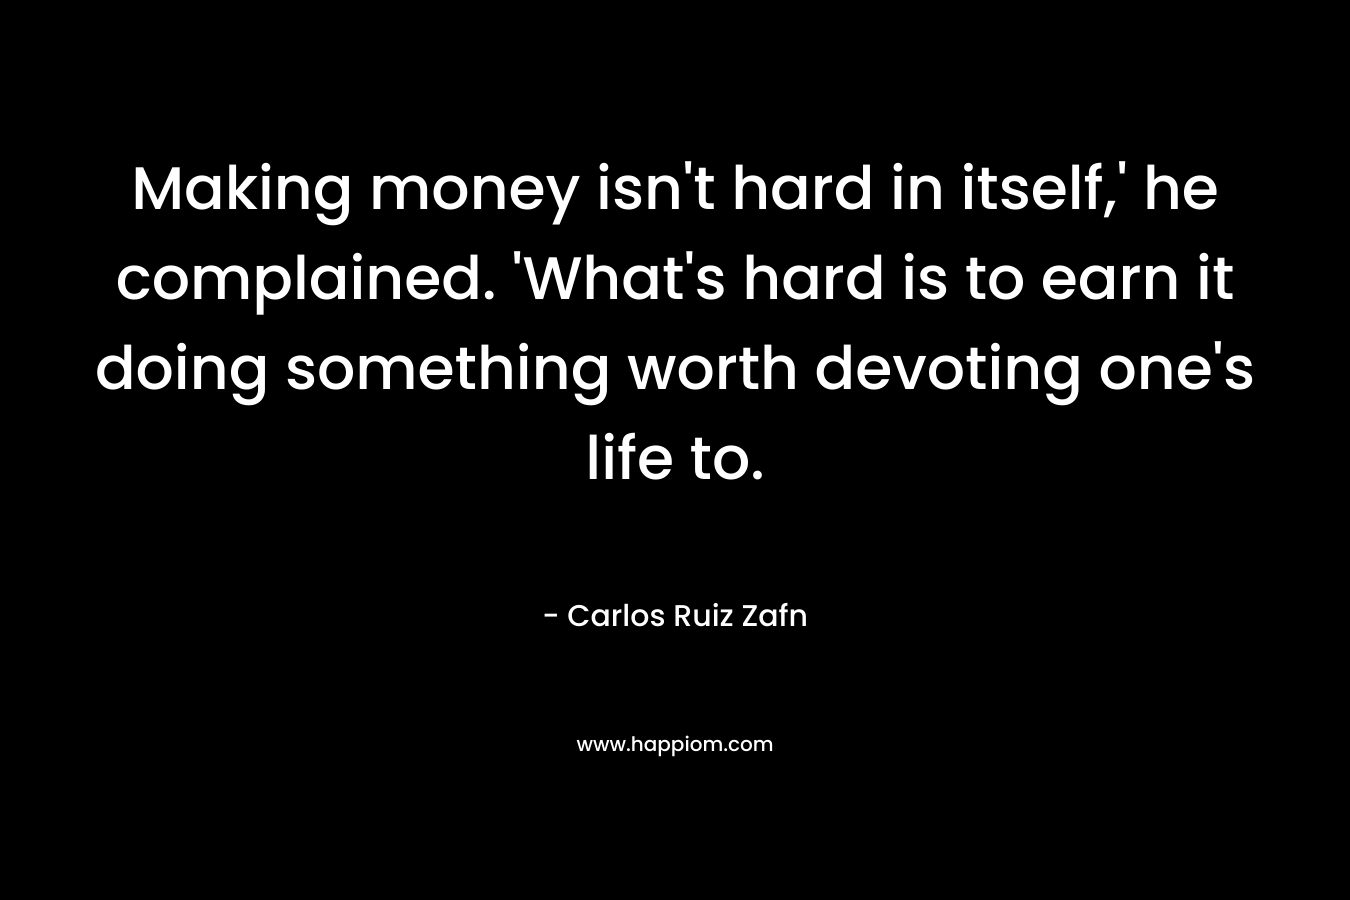 Making money isn't hard in itself,' he complained. 'What's hard is to earn it doing something worth devoting one's life to.